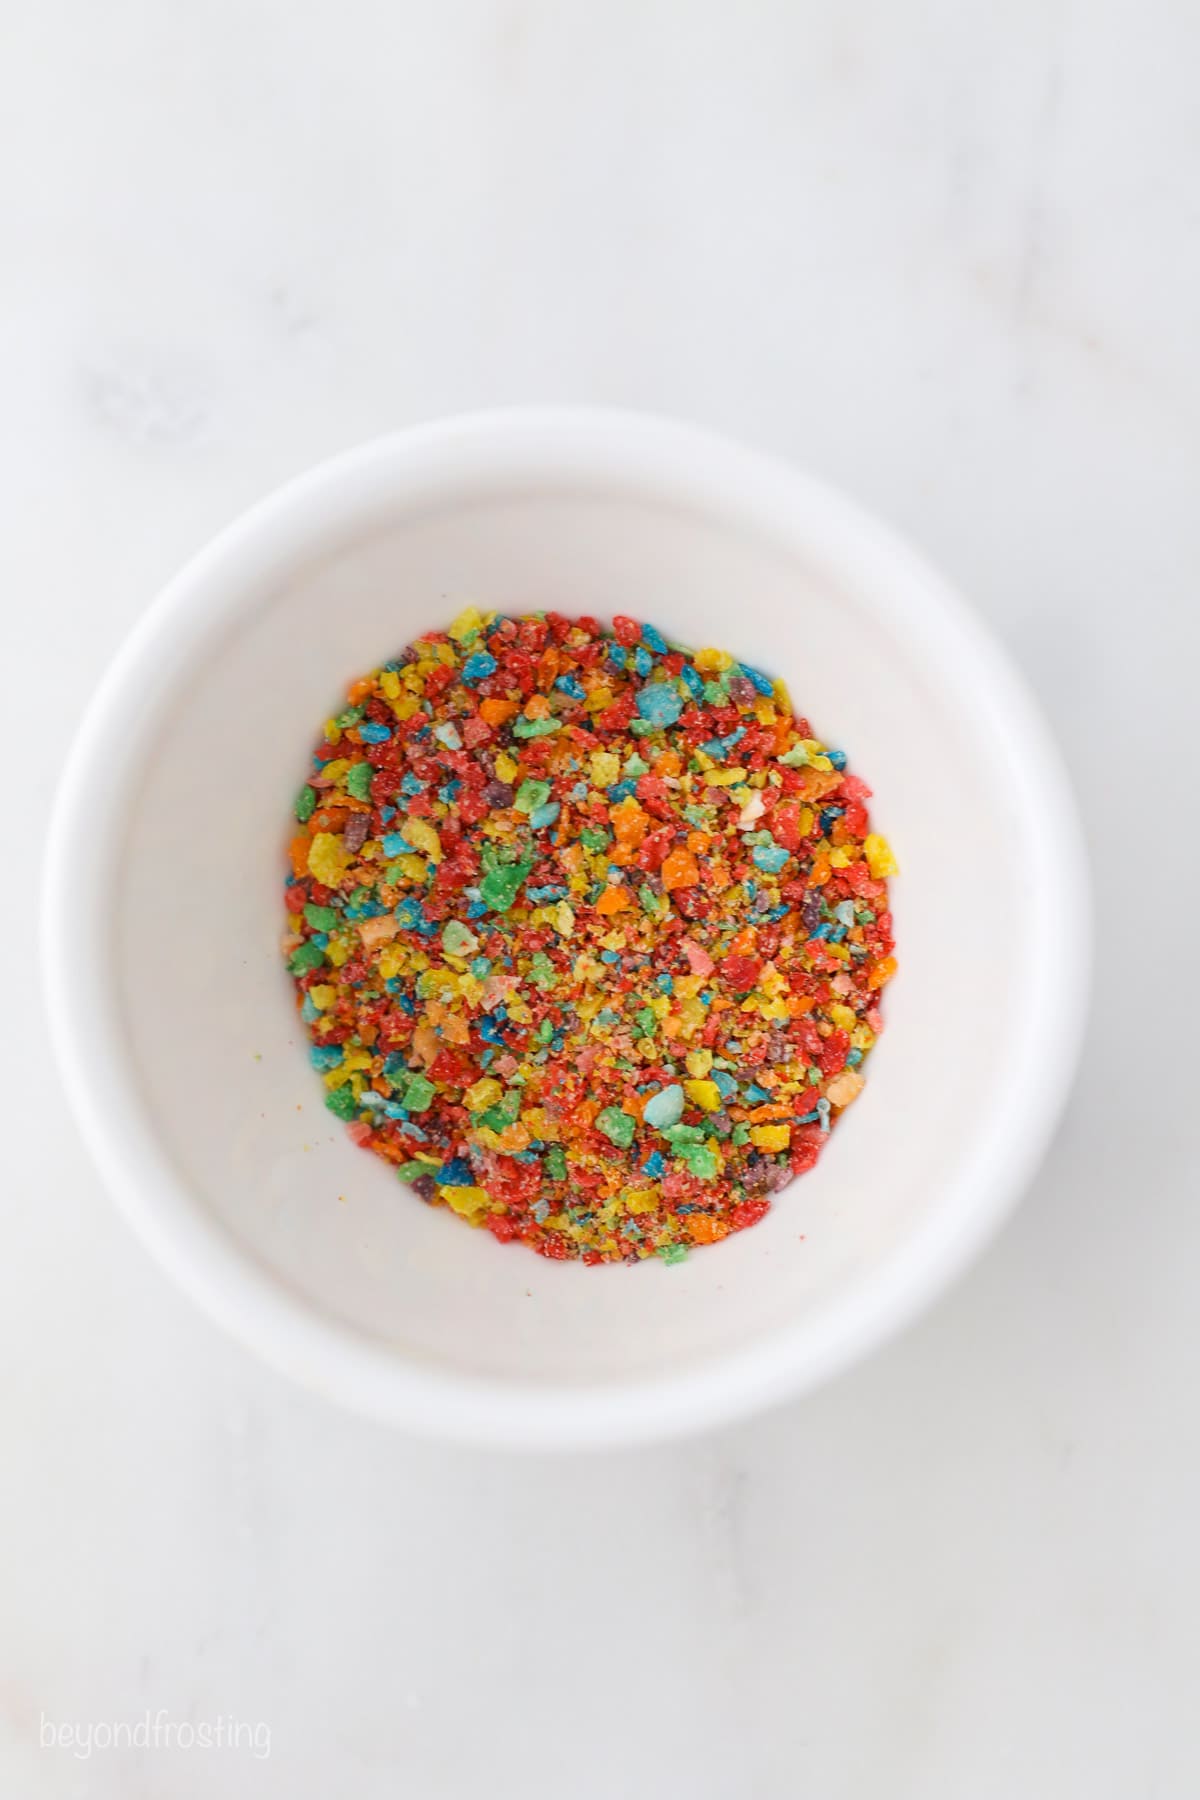 Overhead view of dry Fruity Pebbles cereal in a bowl.